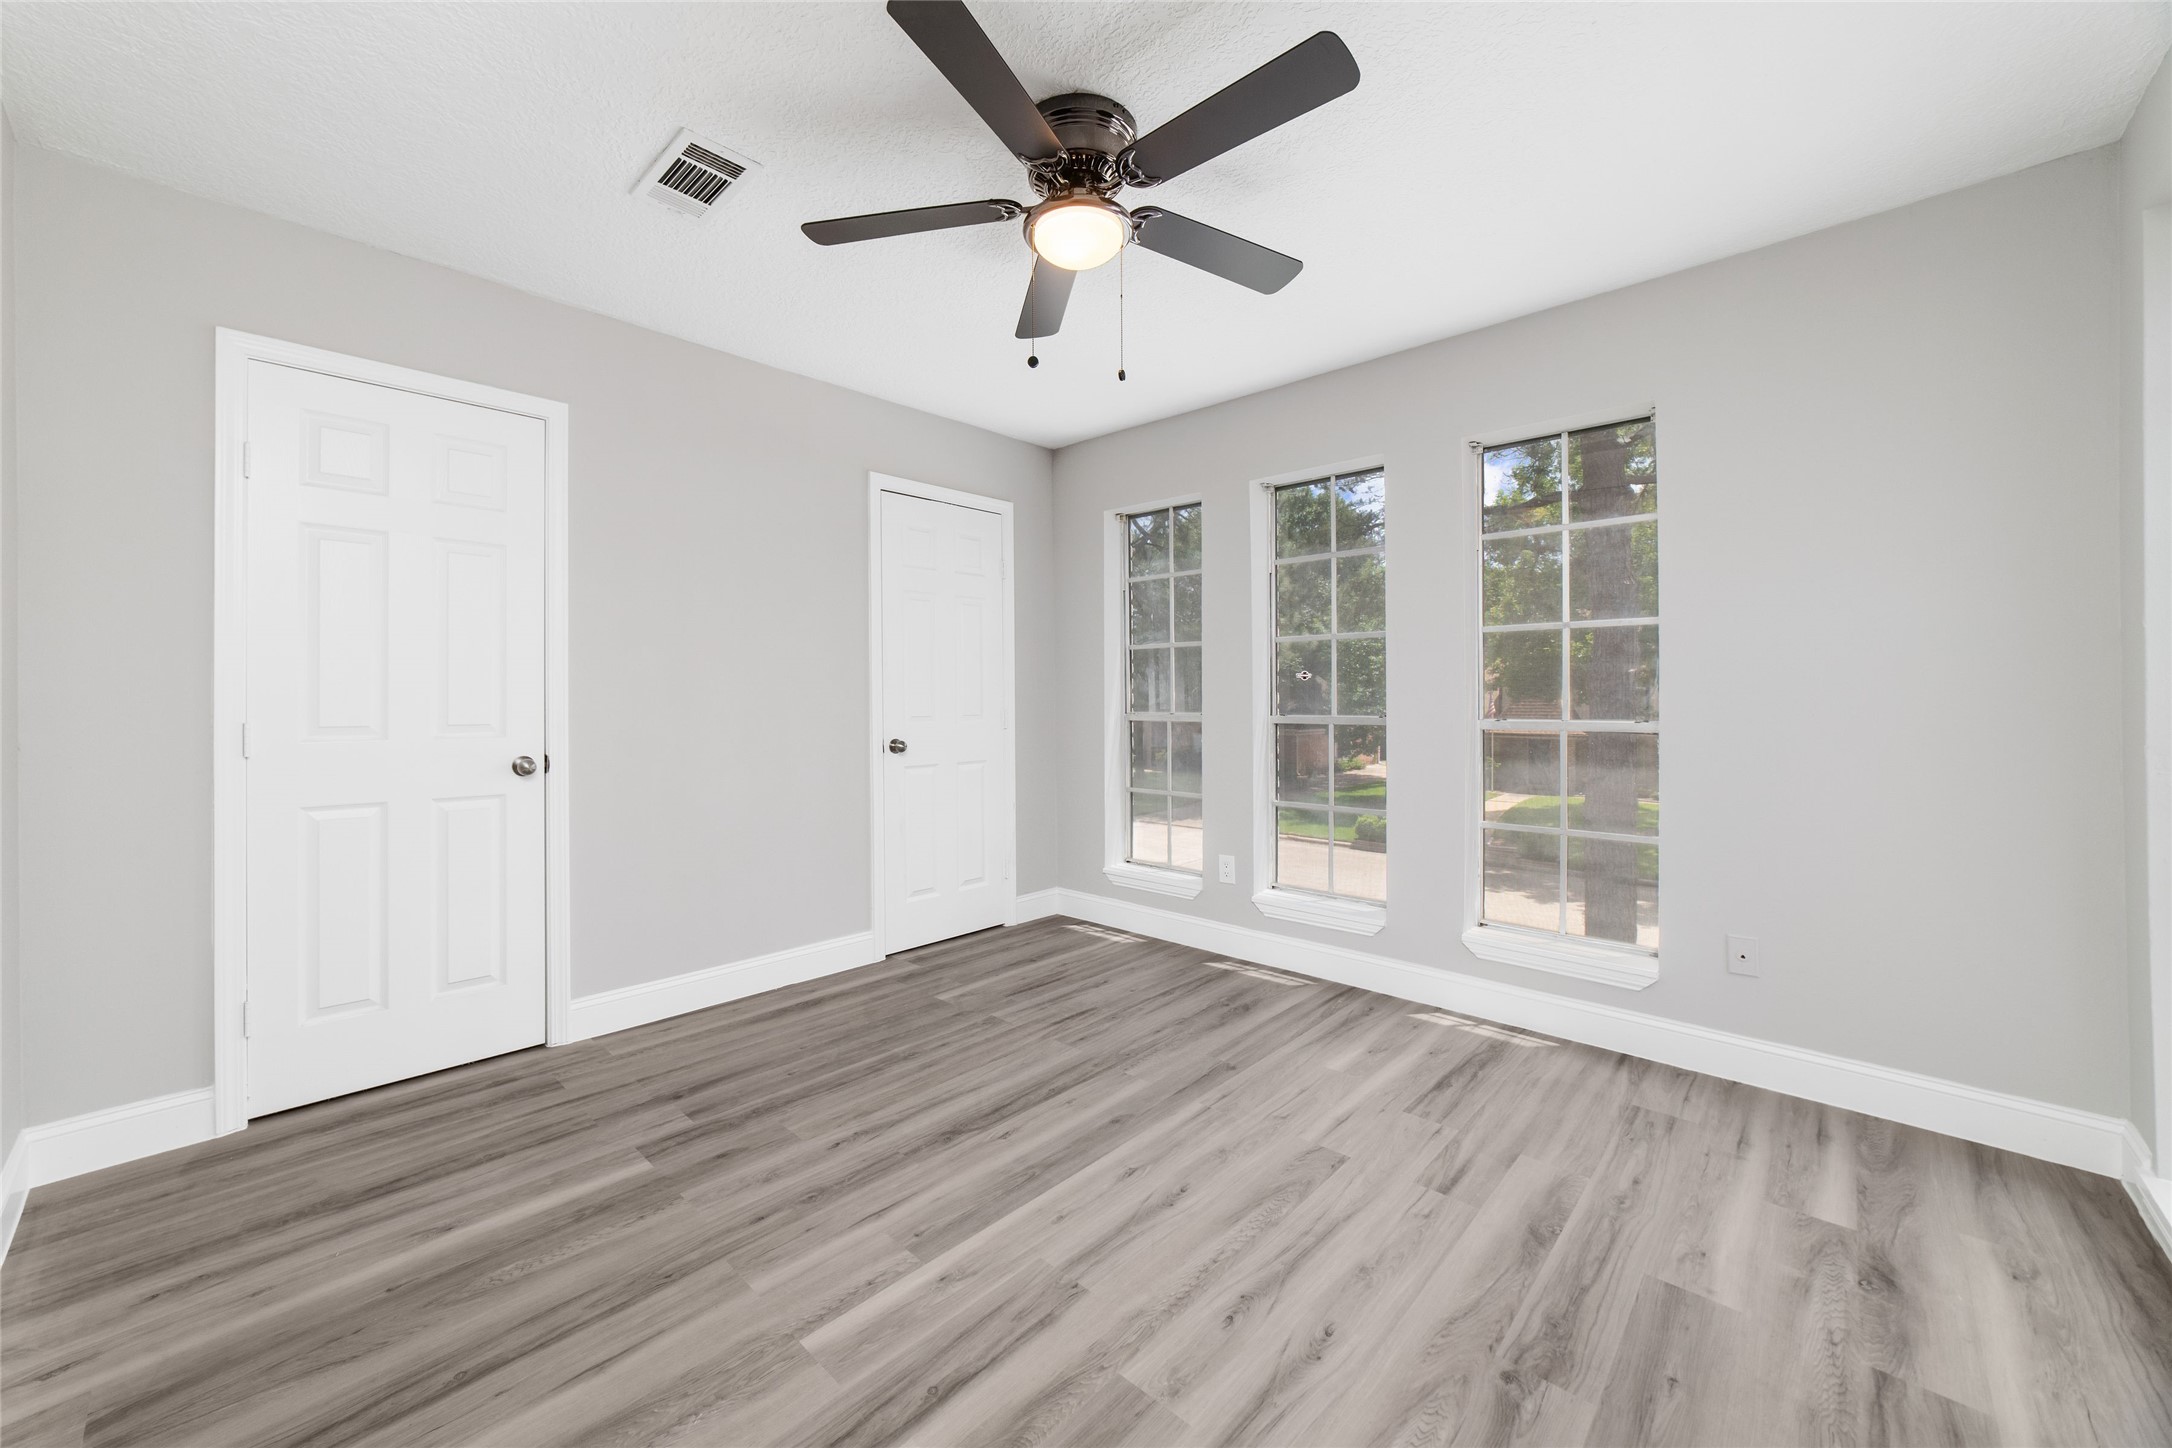 4th Bedroom - If you have additional questions regarding 22506 Wetherburn Lane  in Katy or would like to tour the property with us call 800-660-1022 and reference MLS# 96980135.